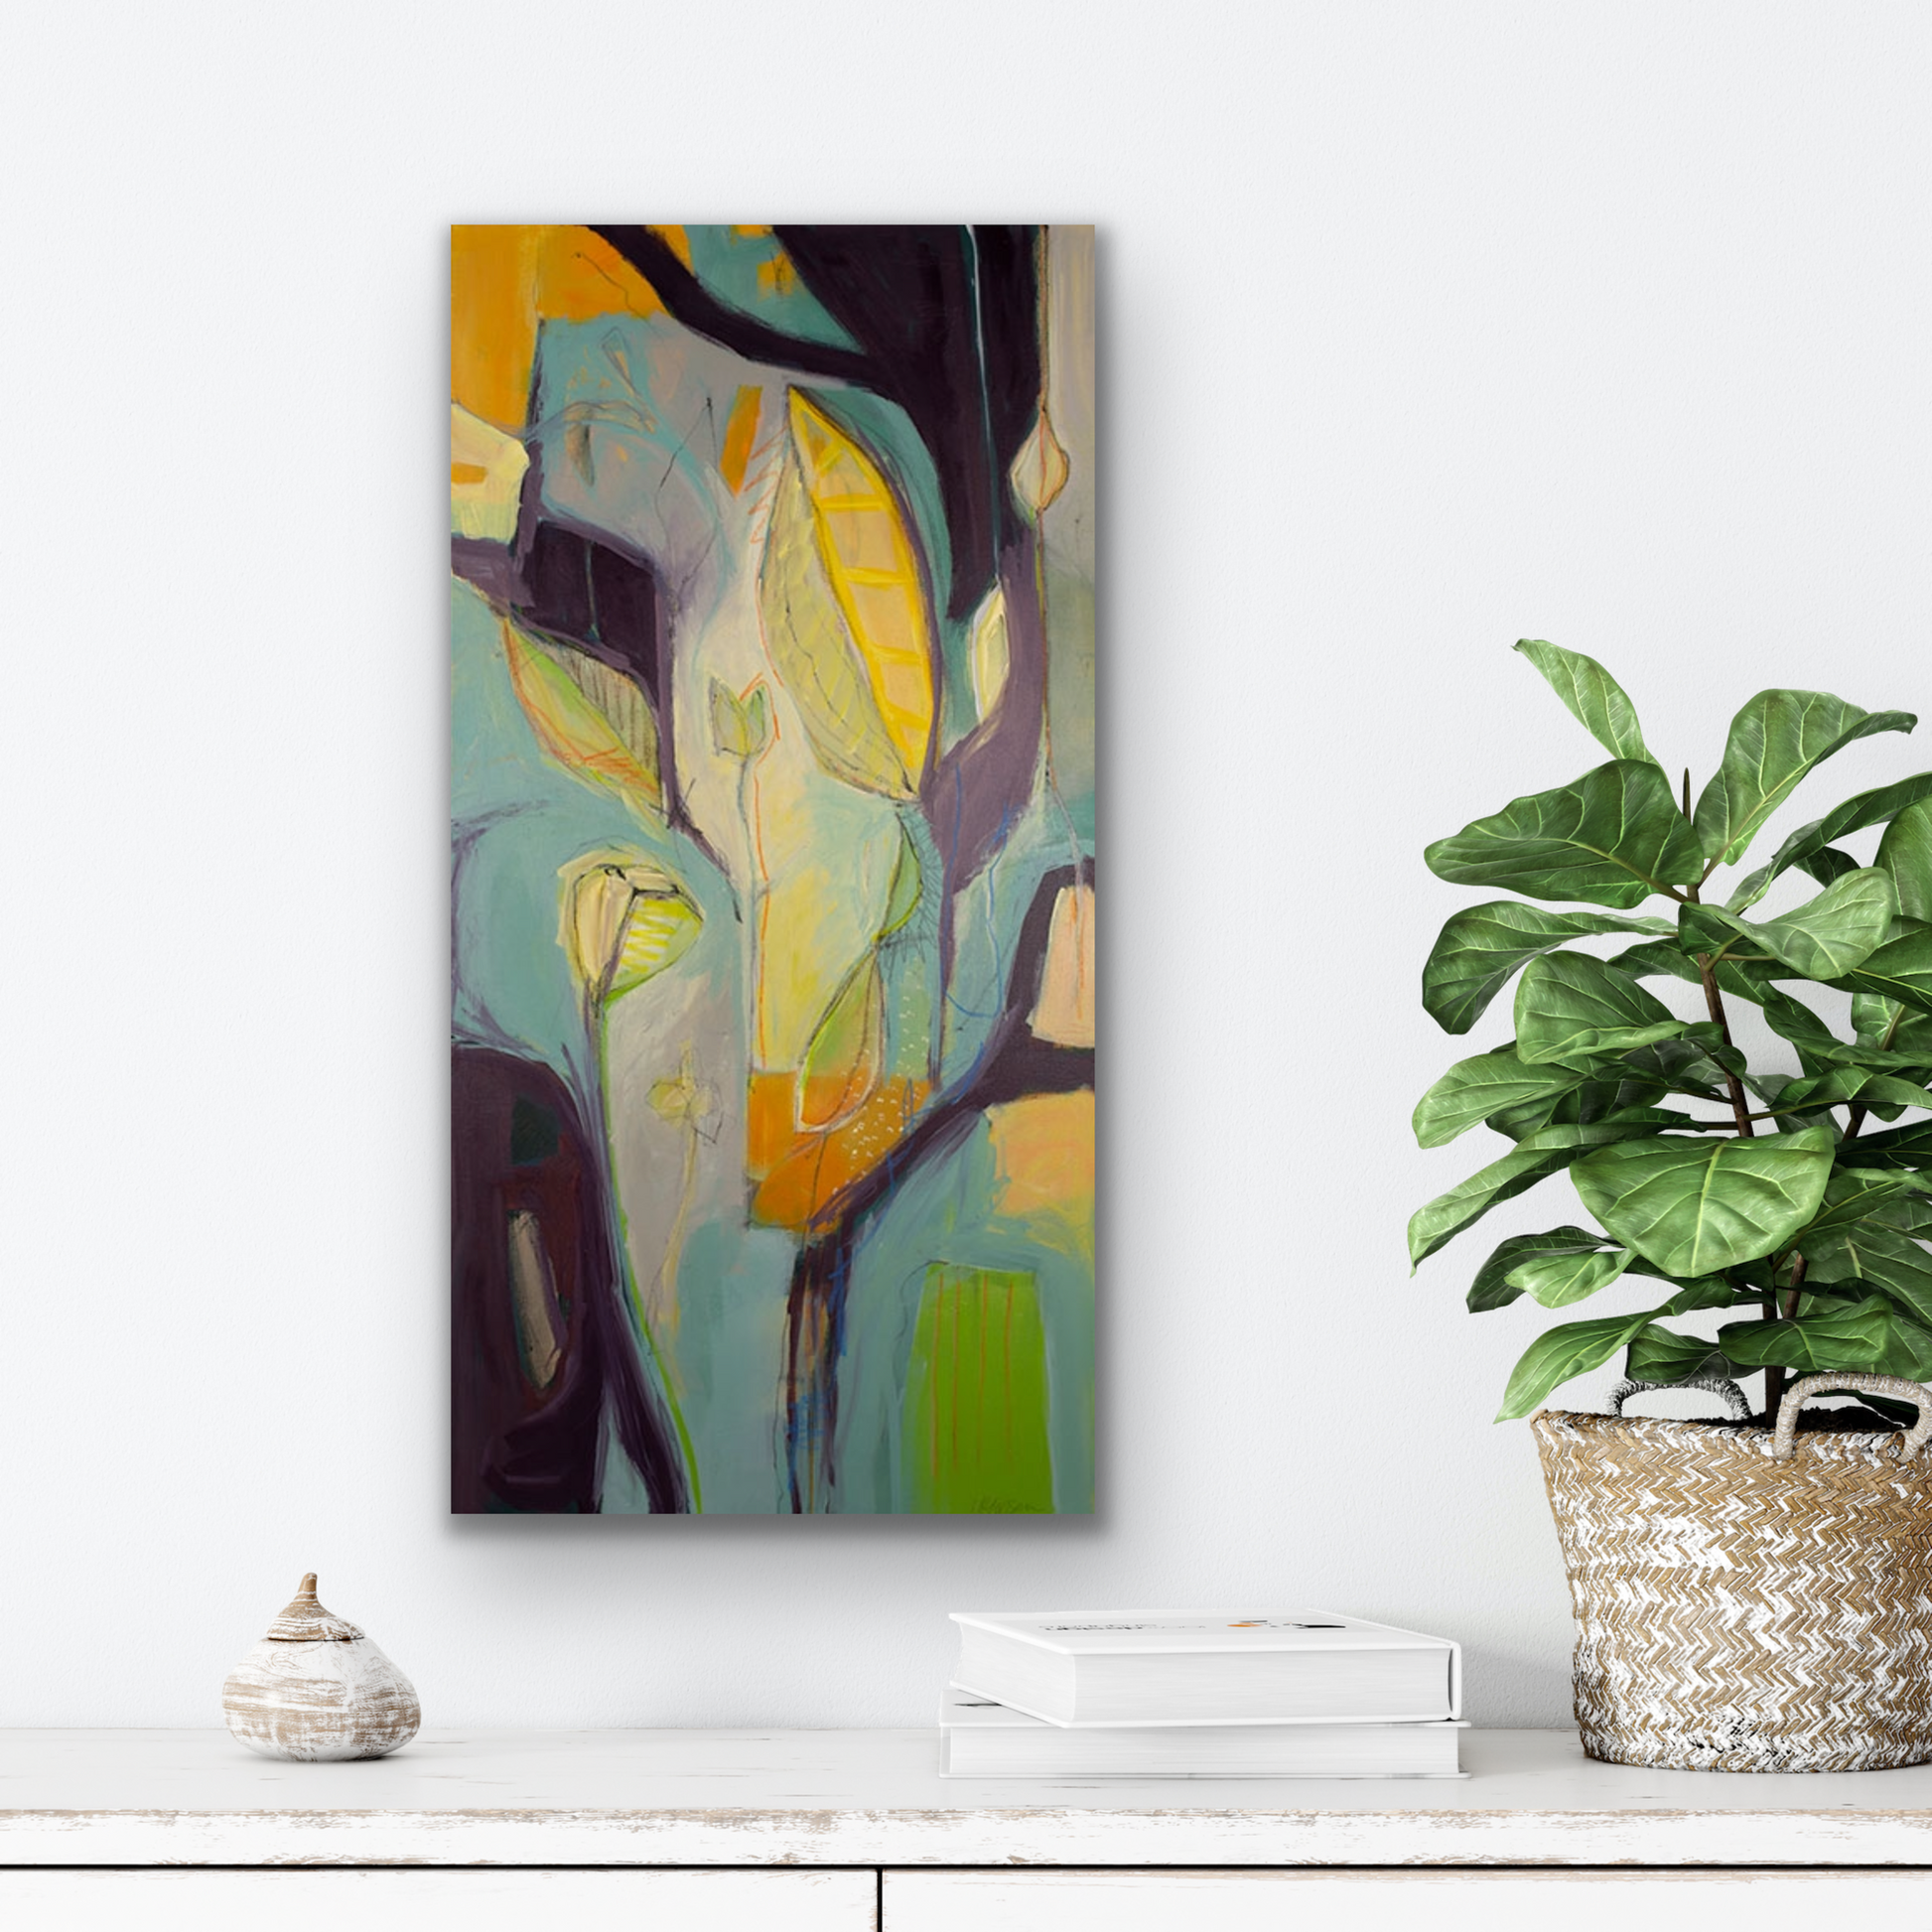 Serenity abstract canvas prints with its soft colour palette works well in bedroom, livingroom or hallway.